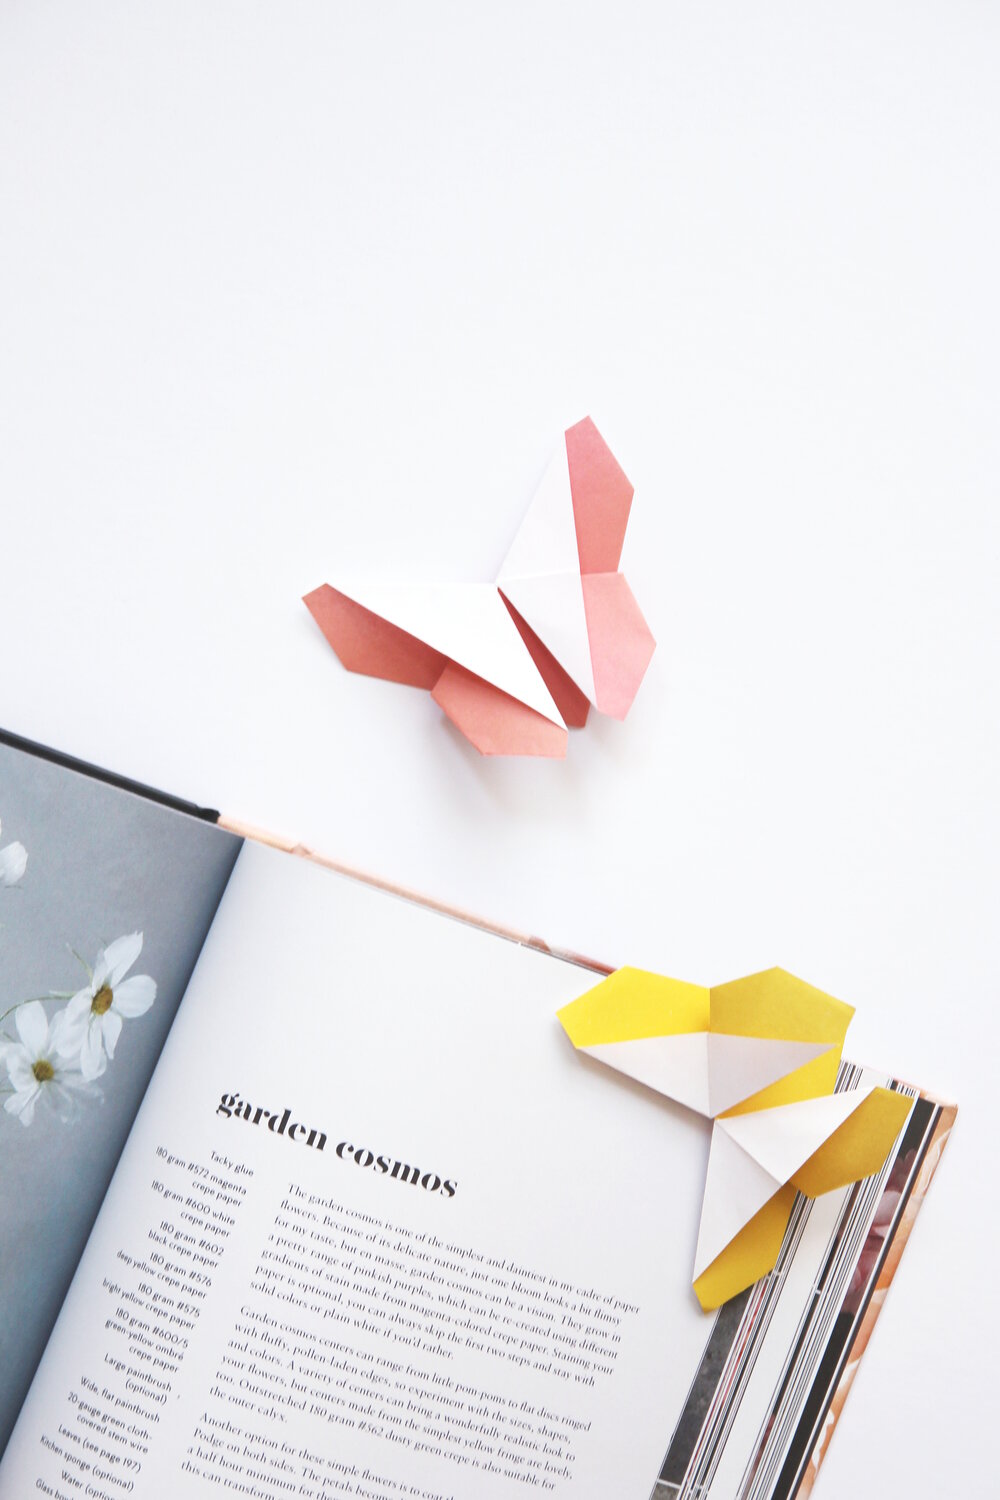 Origami butterfly bookmark